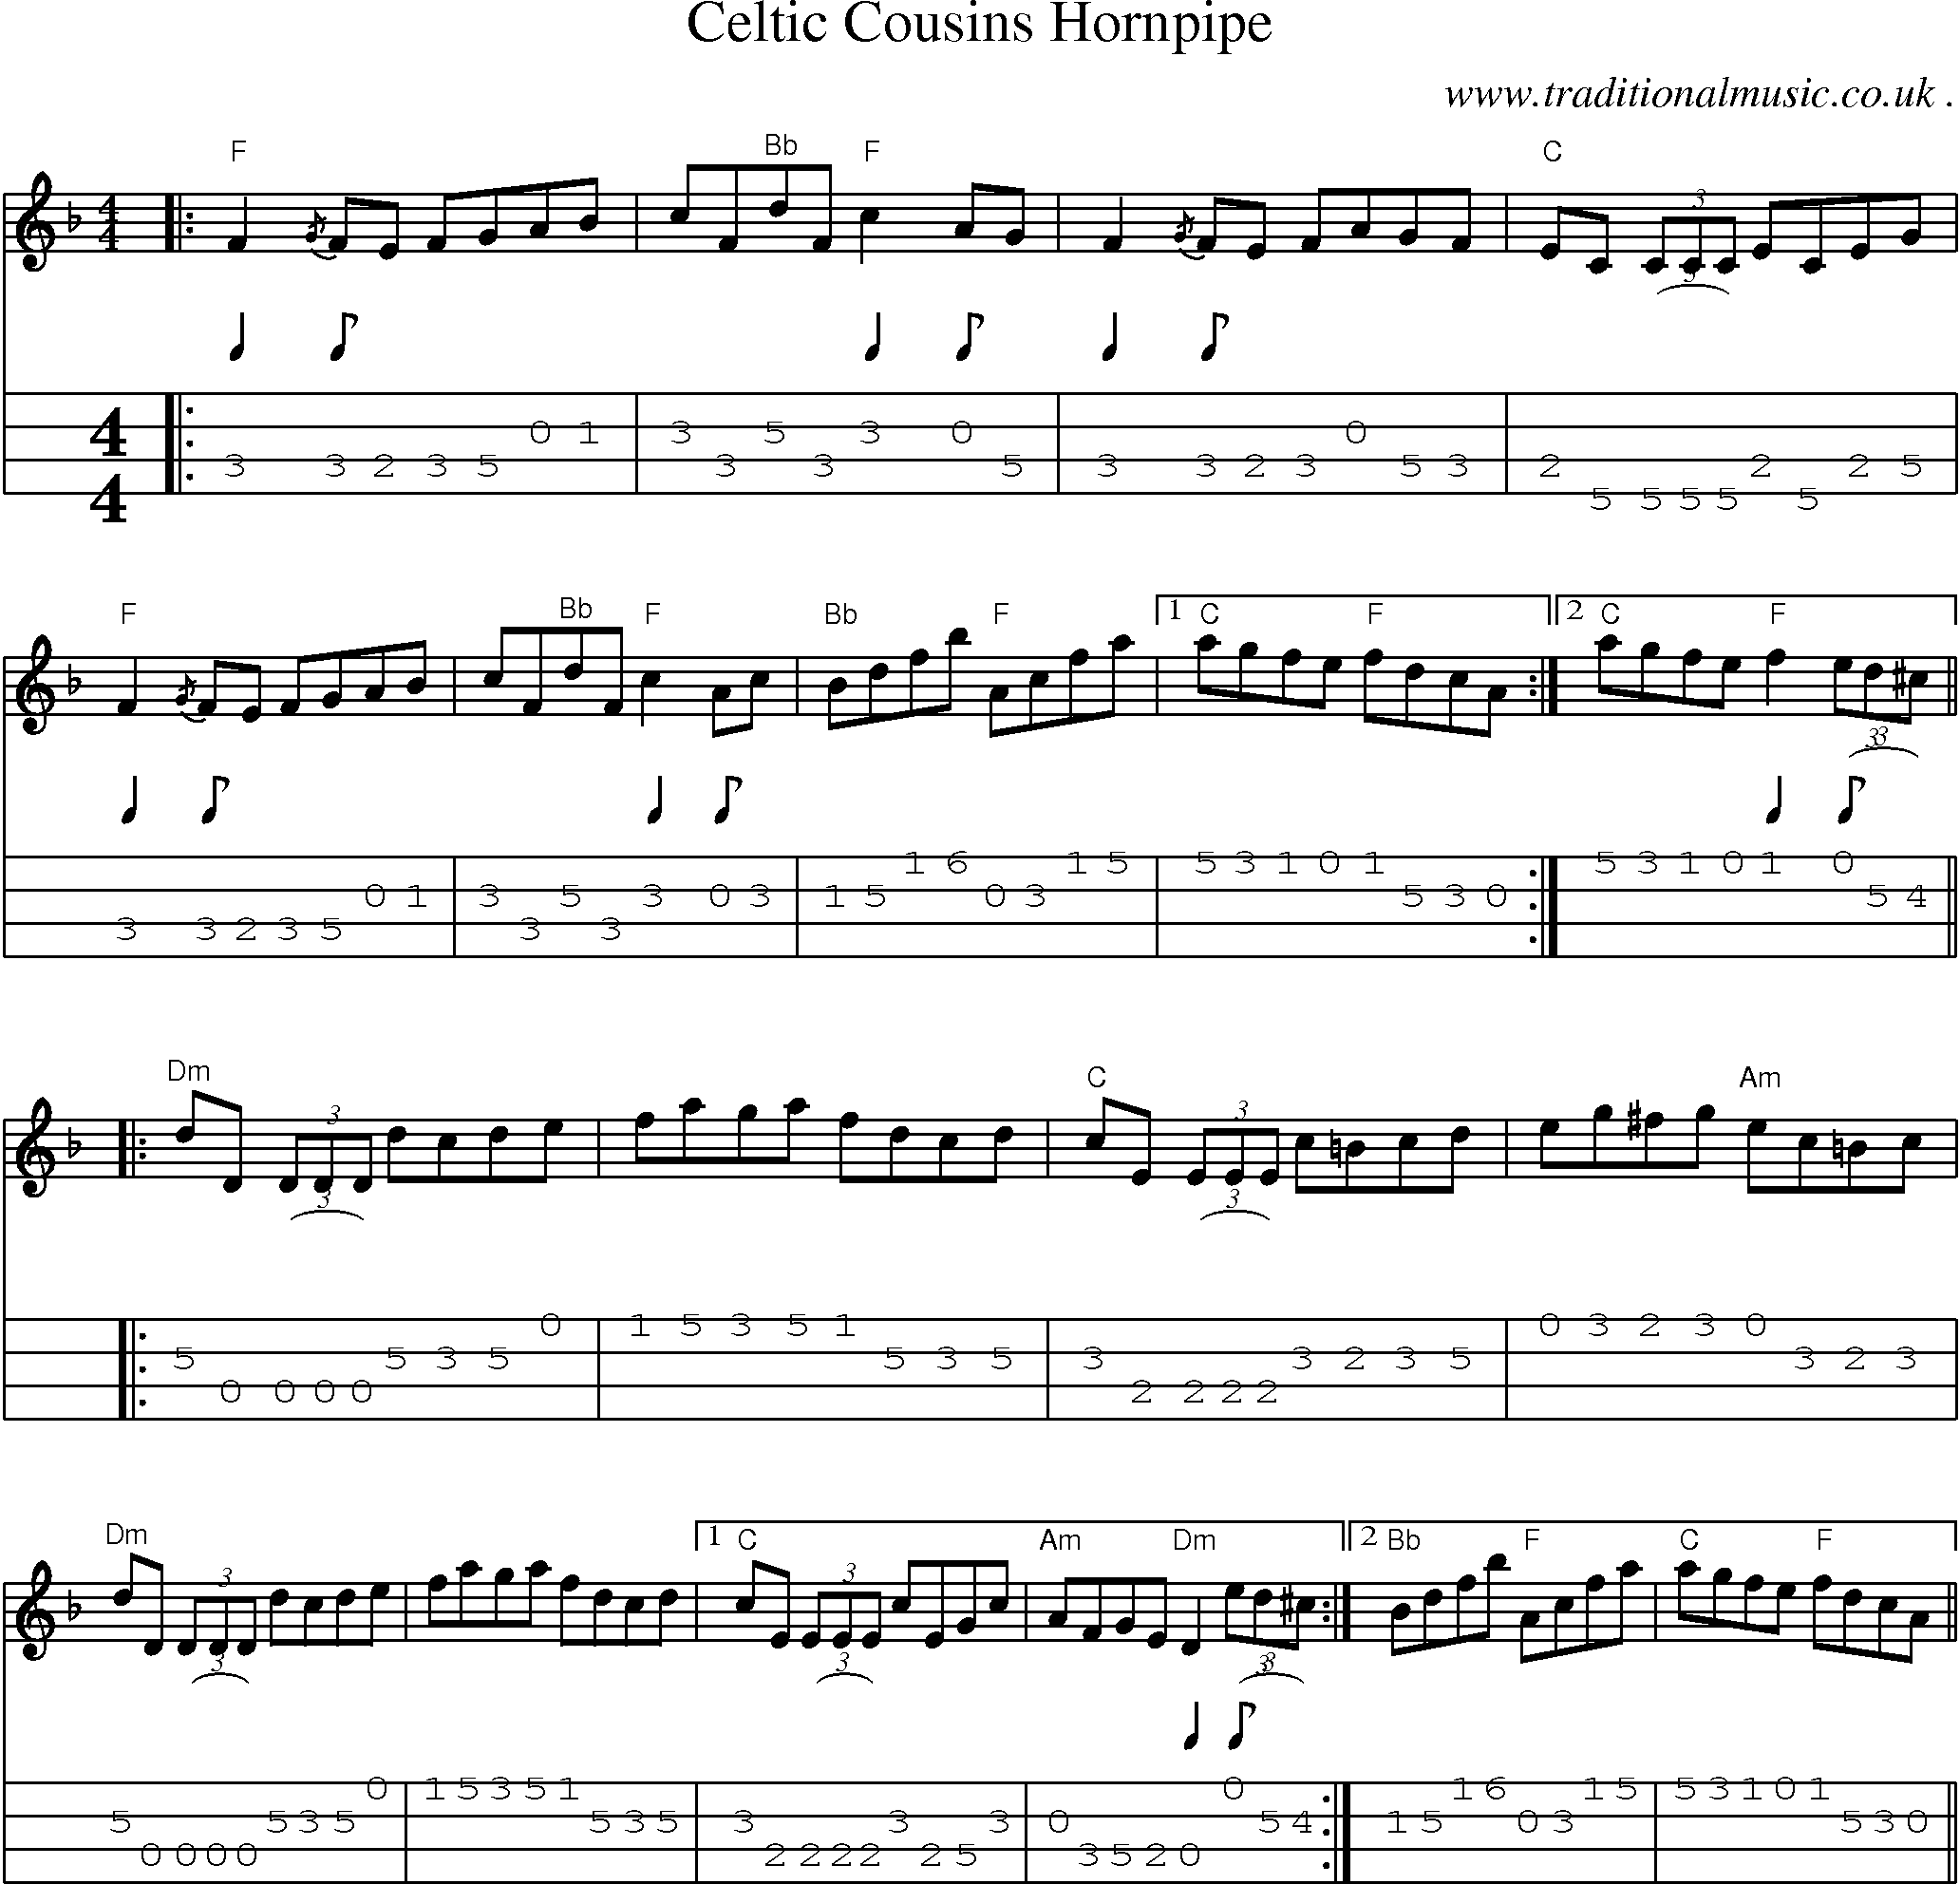 Music Score and Mandolin Tabs for Celtic Cousins Hornpipe